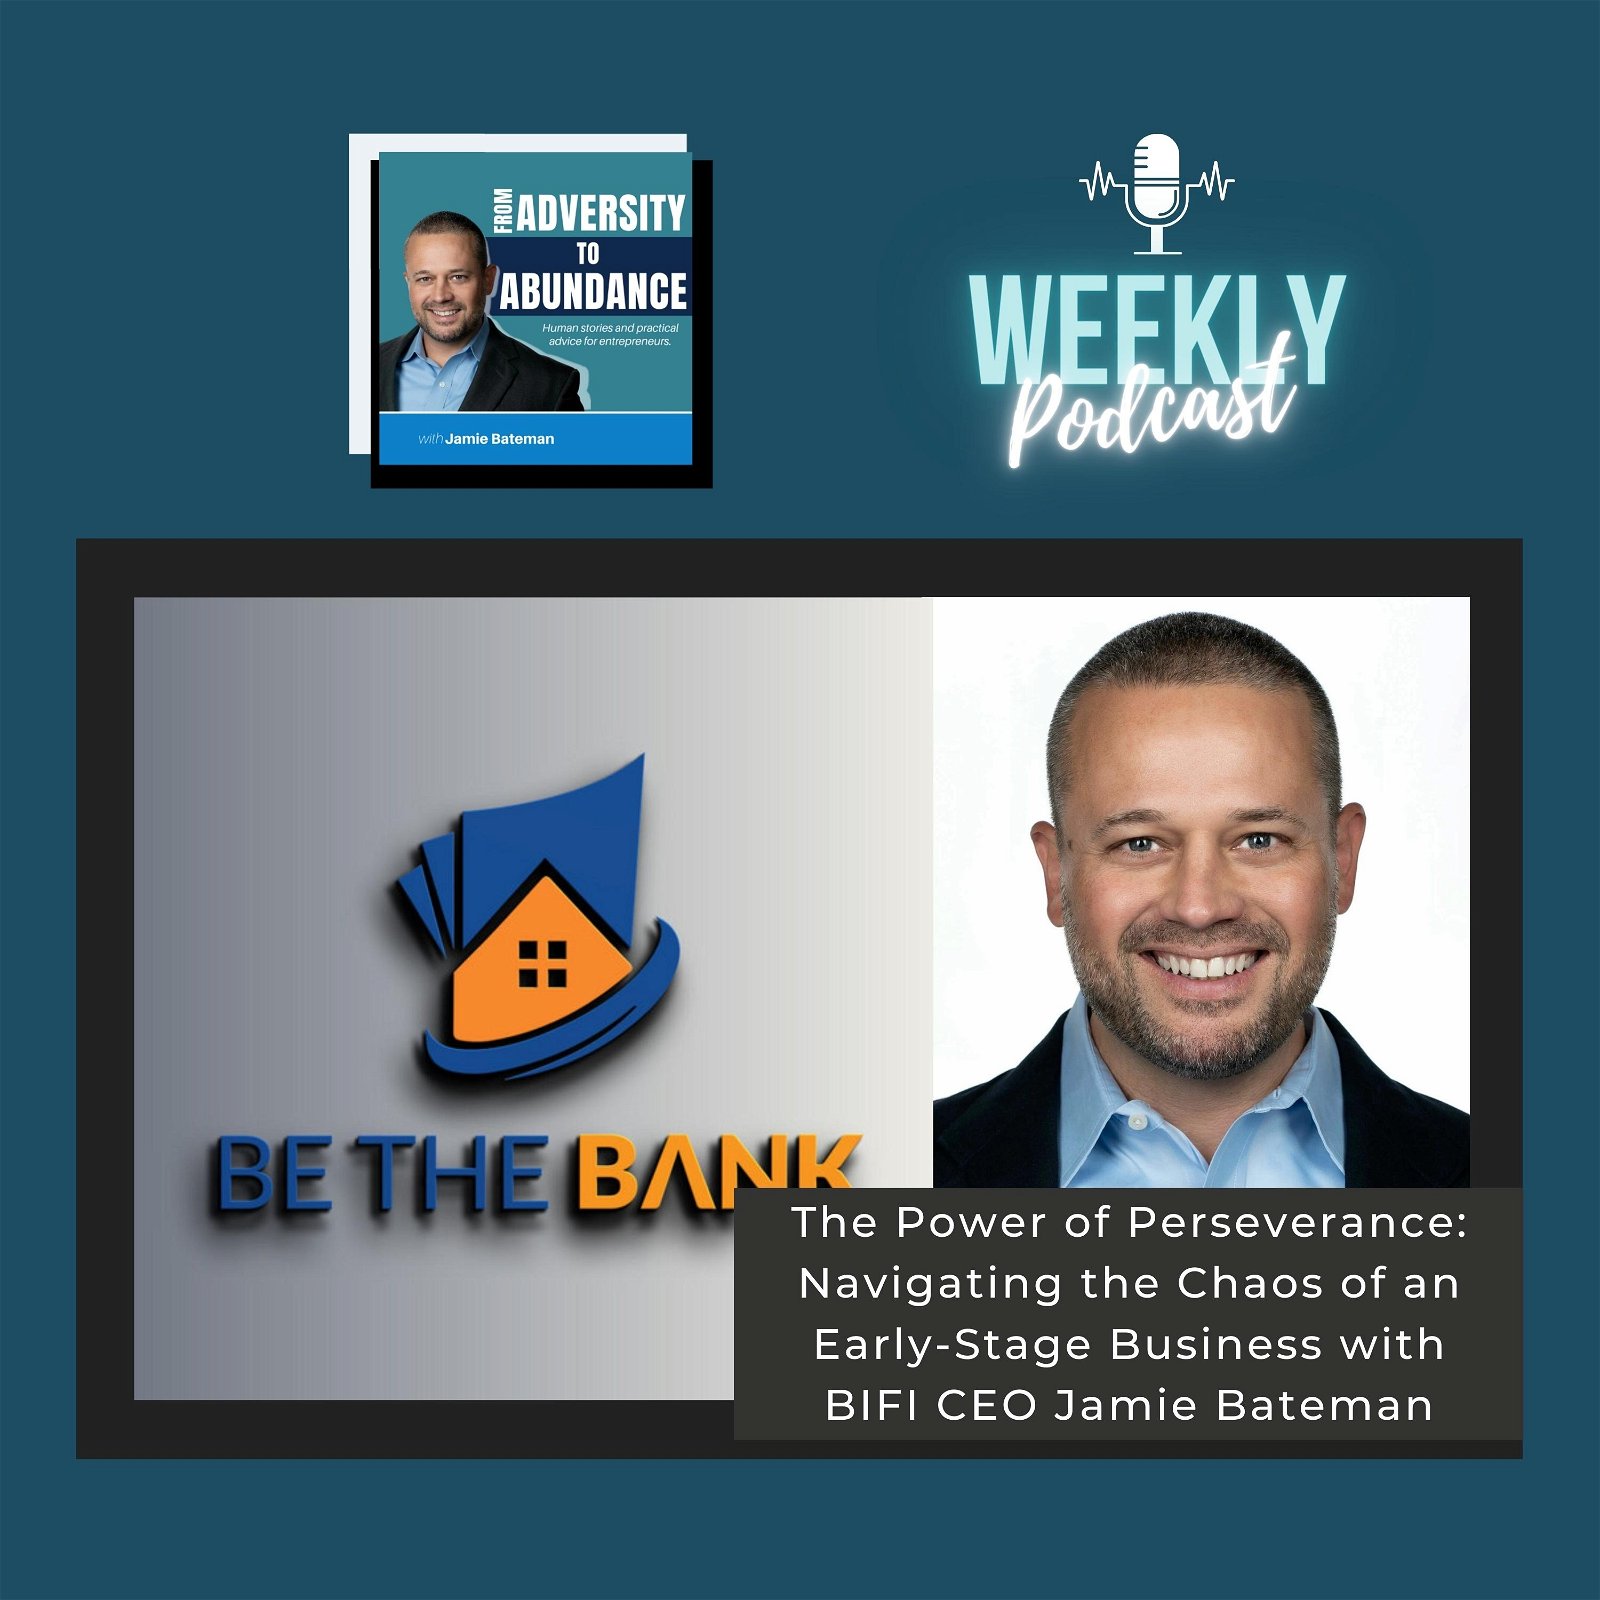 The Power of Perseverance: Navigating the Chaos of an Early-Stage Business with BIFI CEO Jamie Bateman